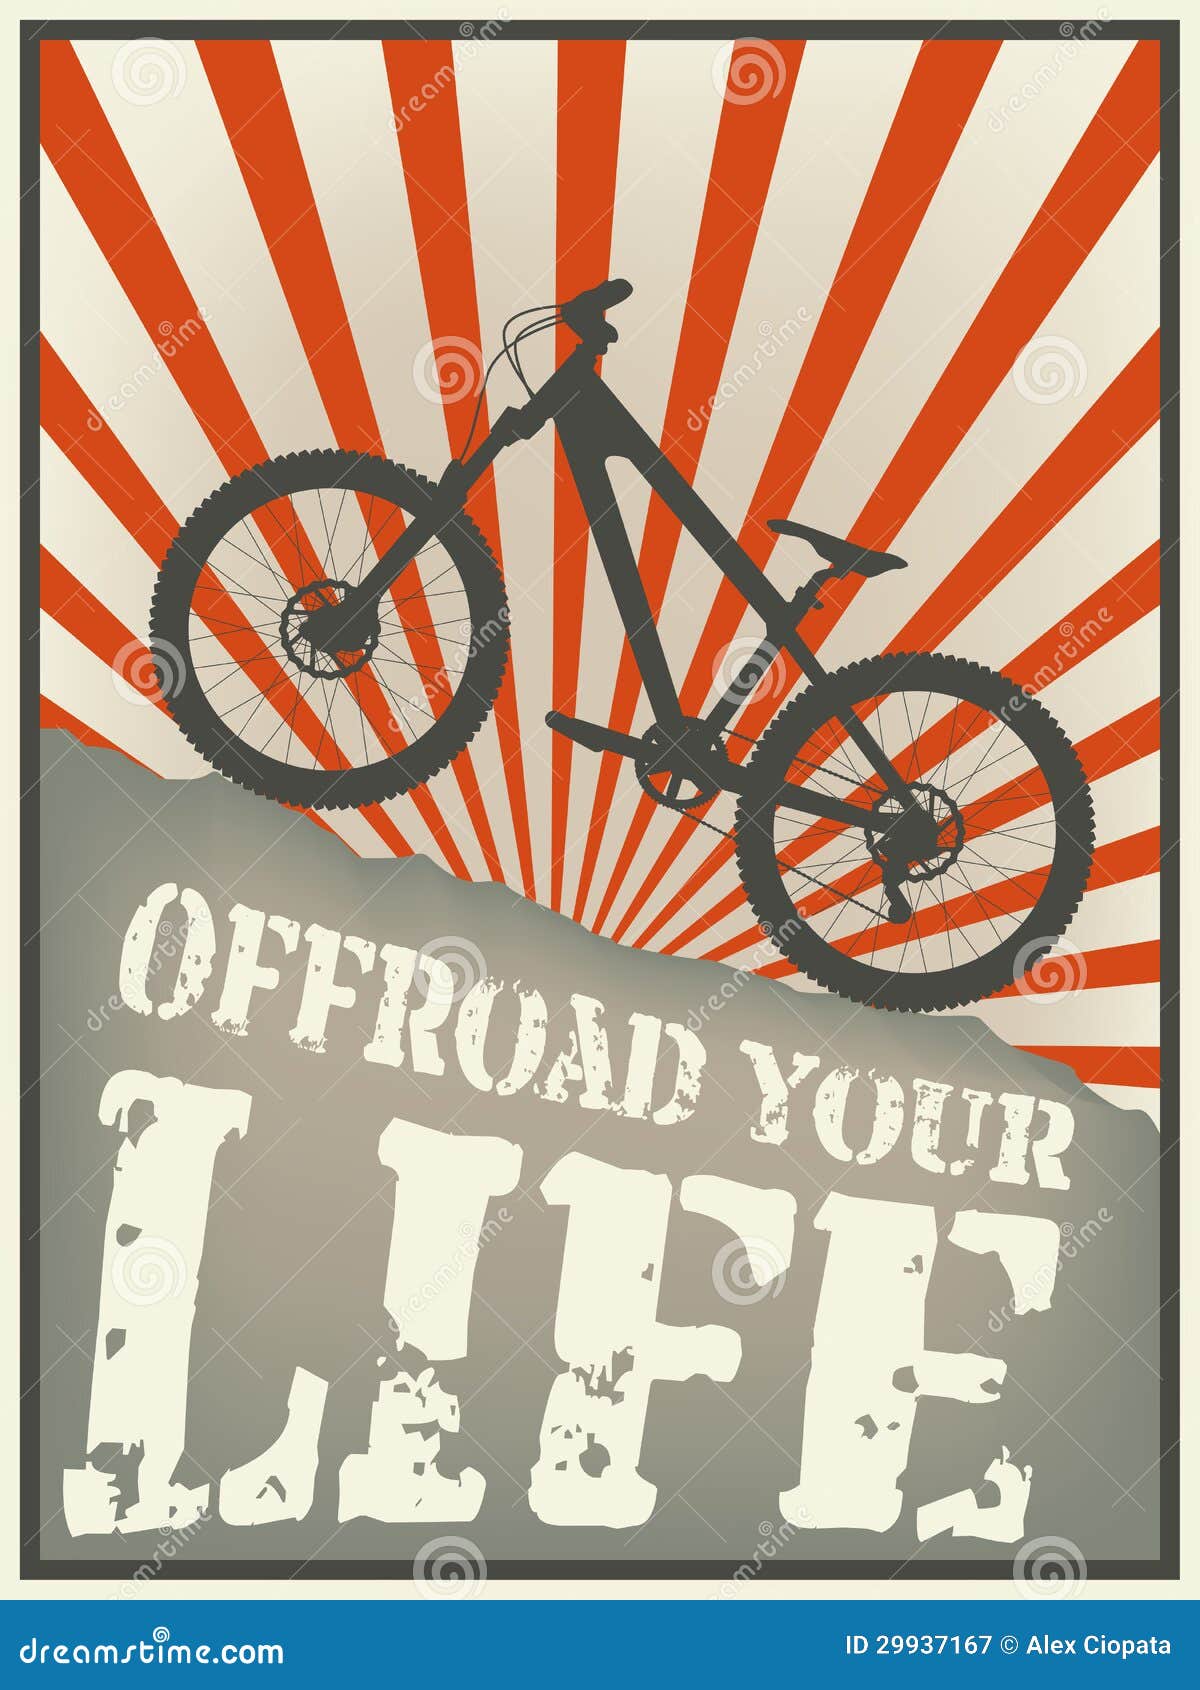 offroad your life